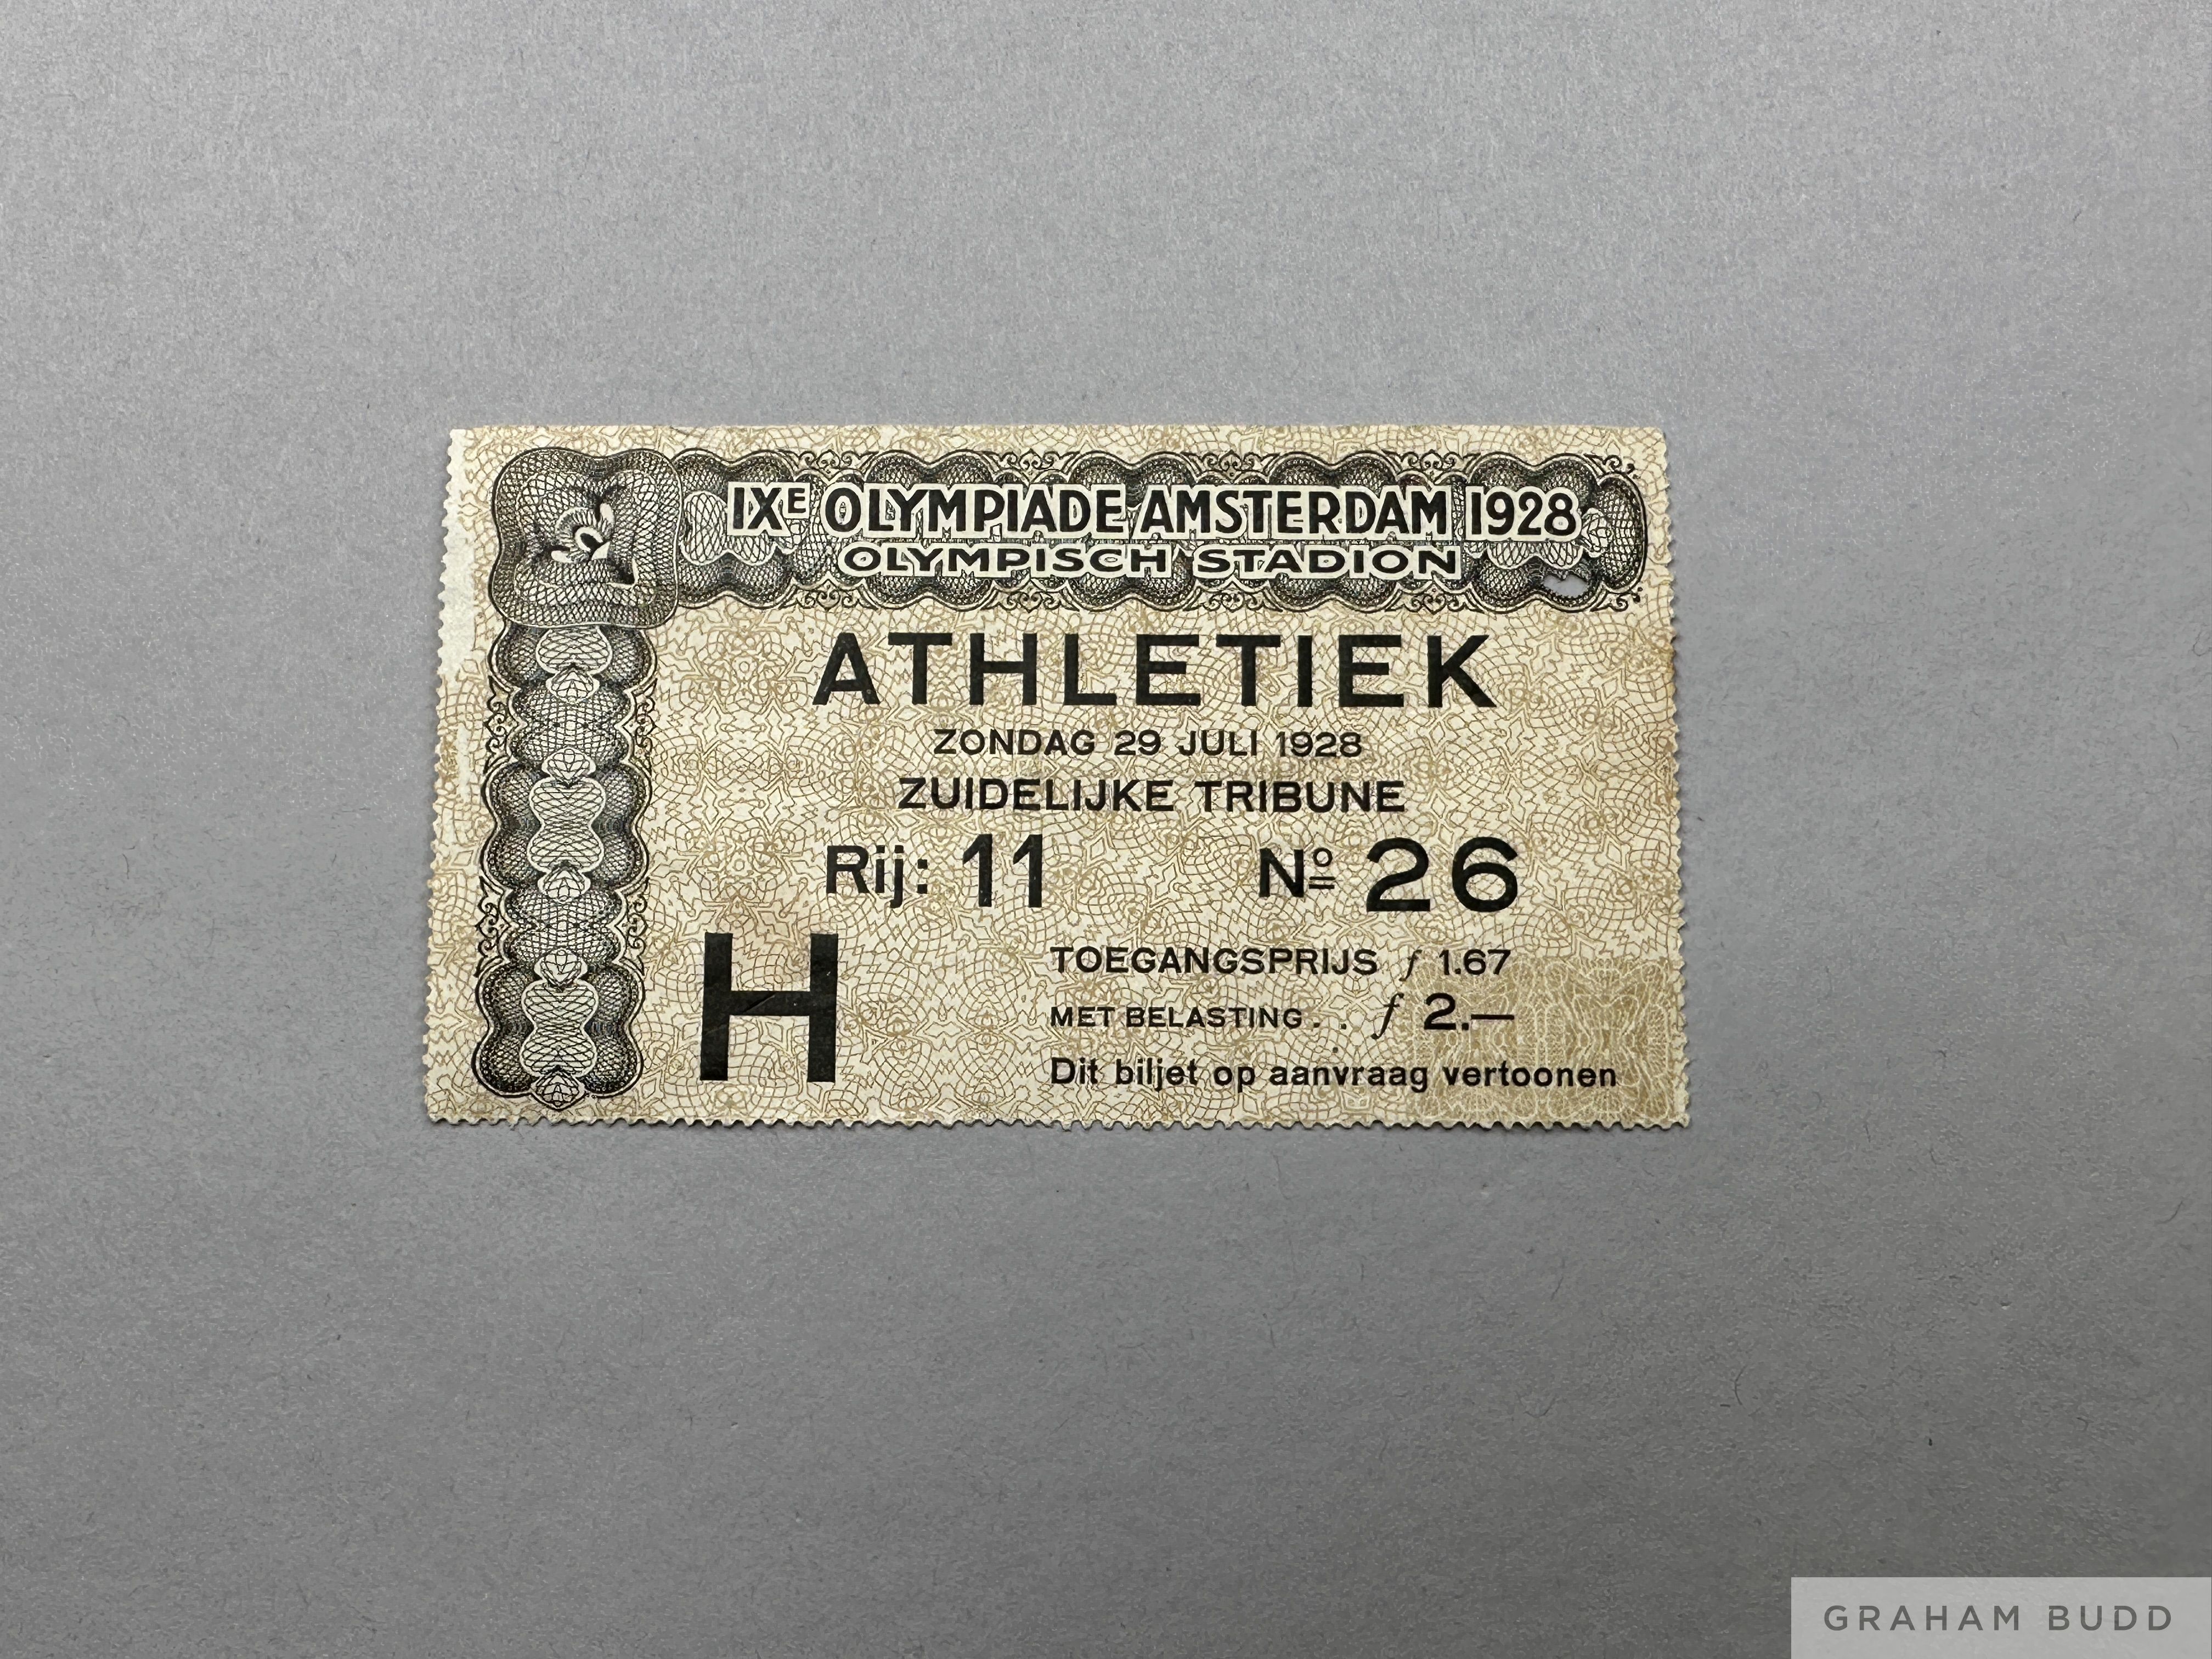 A 1928 Olympic ticket for 29th July